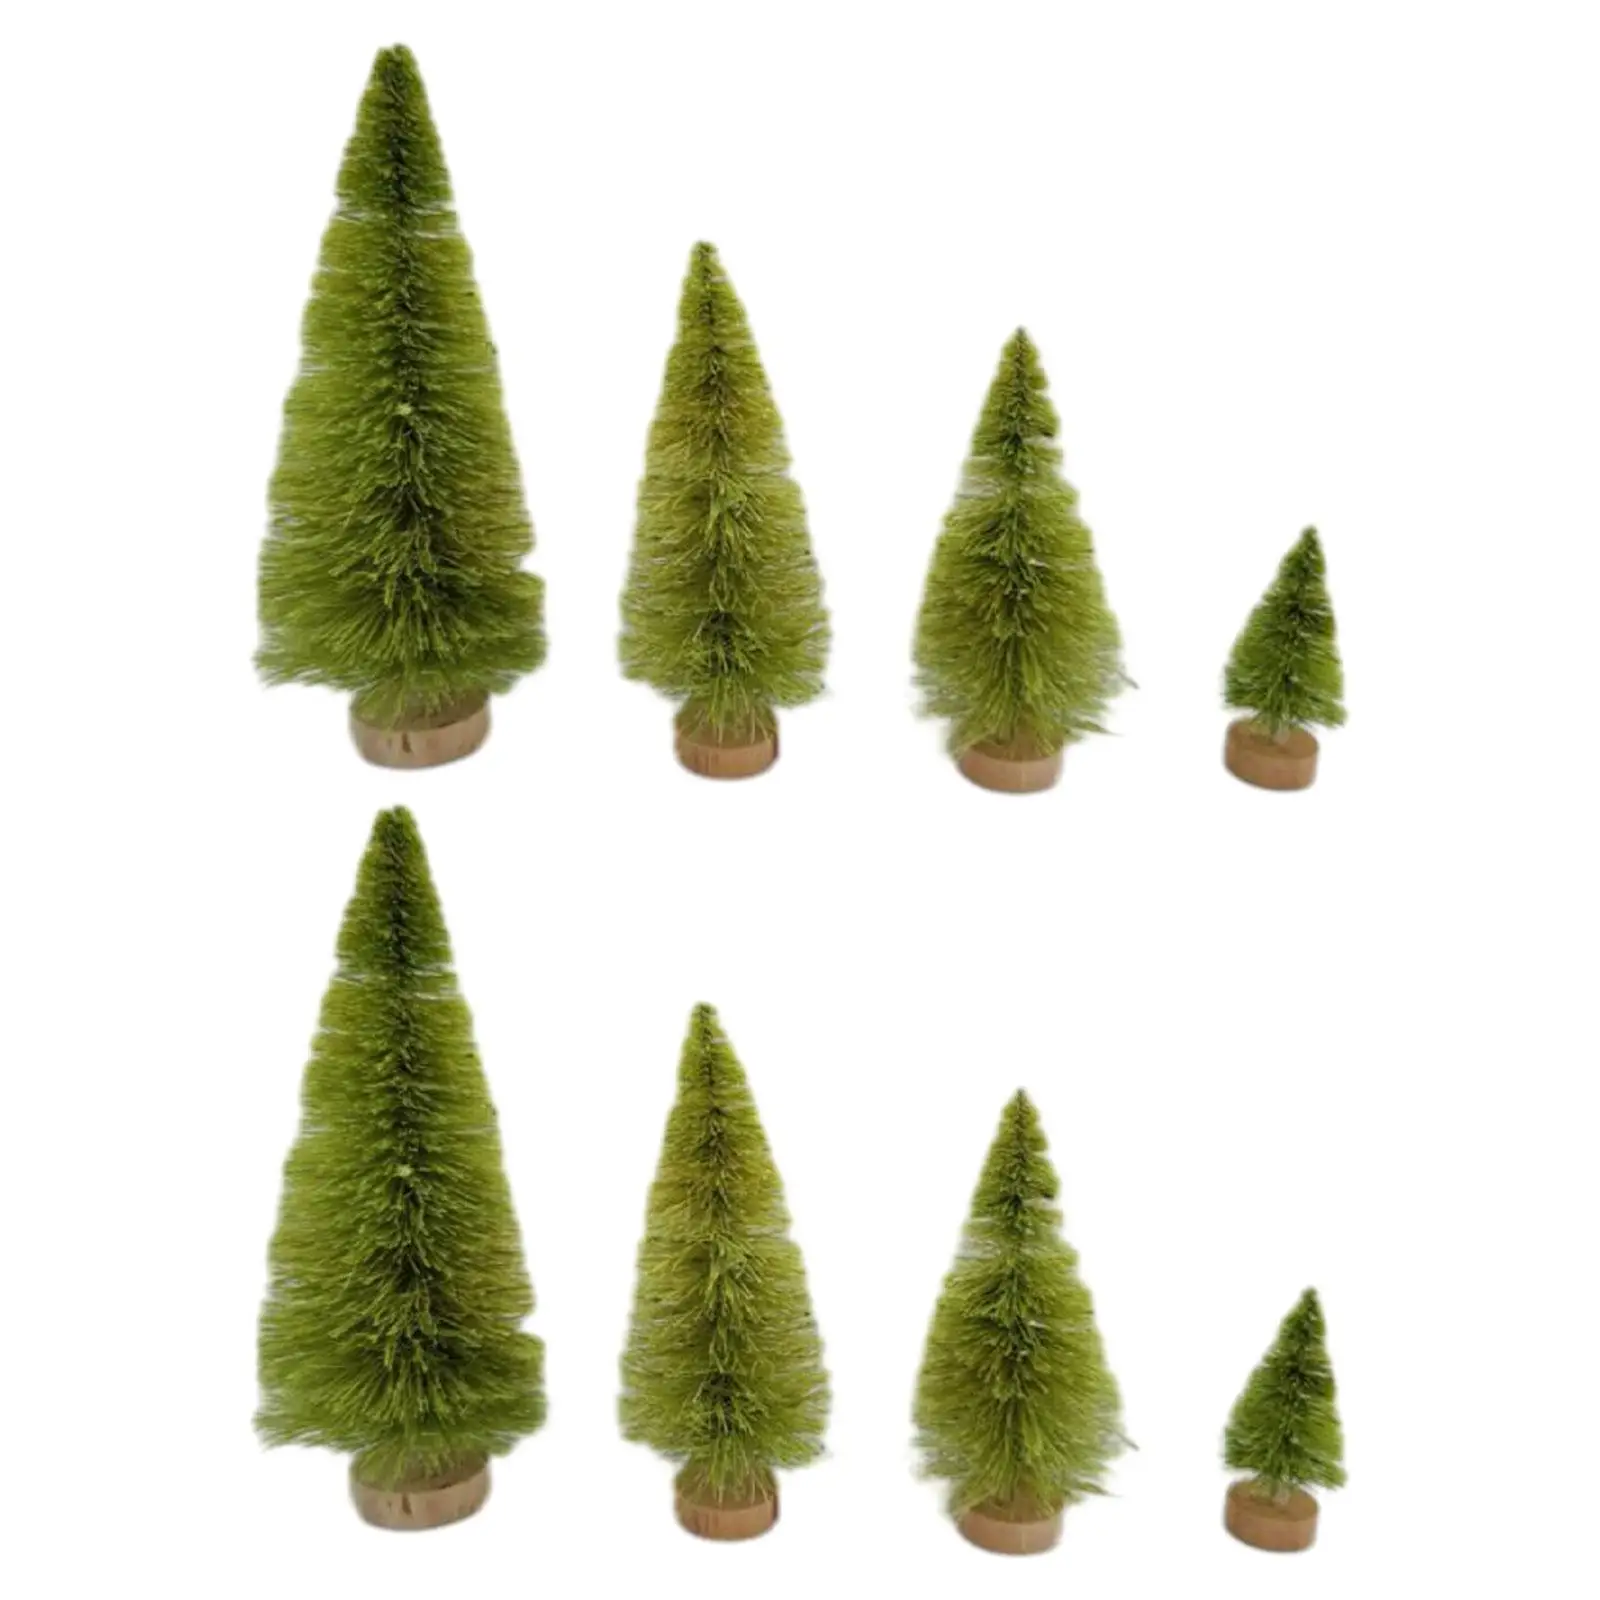 8x Artificial Christmas Tree Brush Trees Desktop Miniature Wood Base Christmas Decorations Pine Trees for Indoor Home Holiday